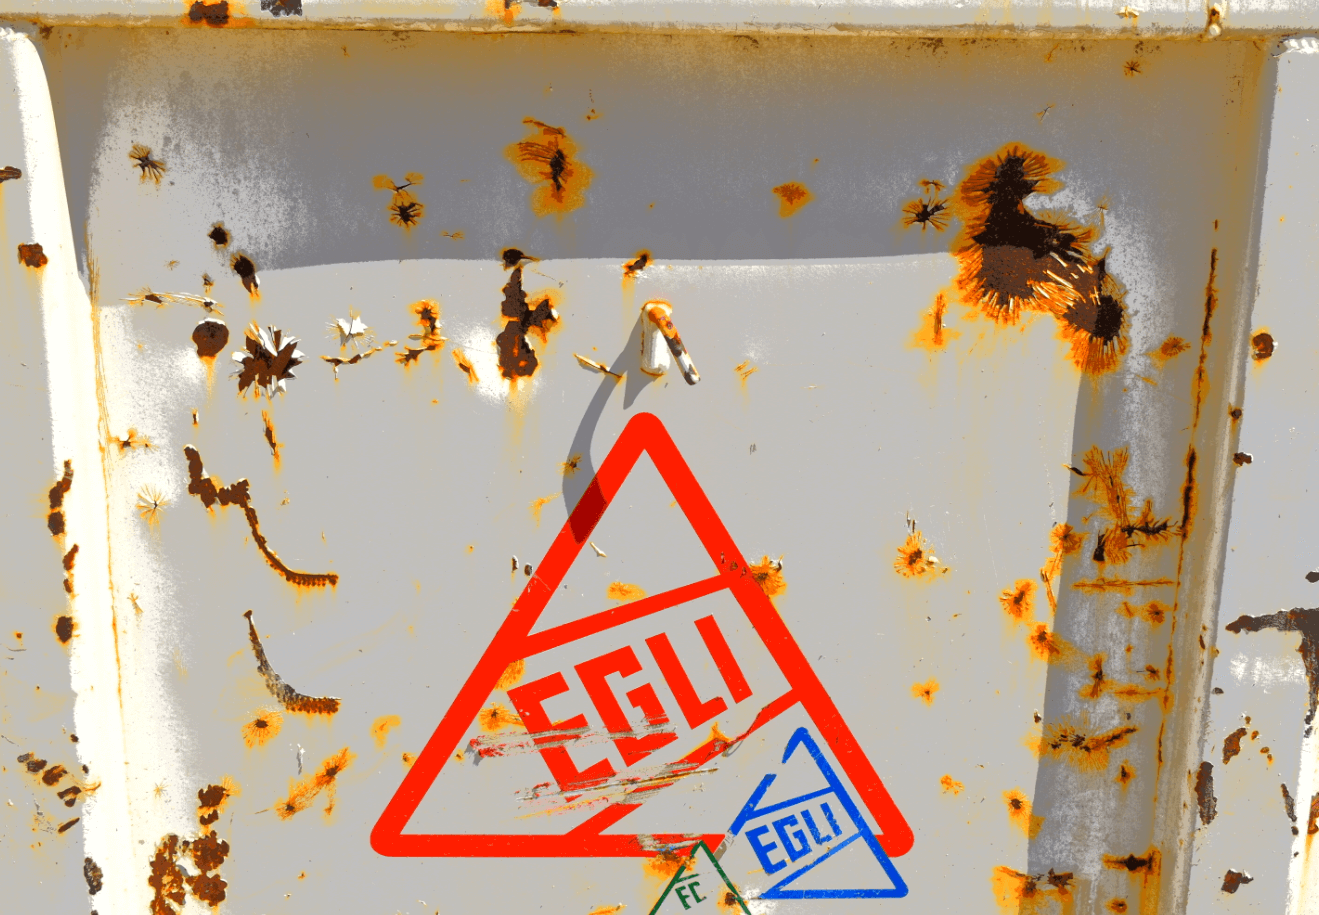 Rusty metal panel with logo EGLI in red, blue, and green triangles